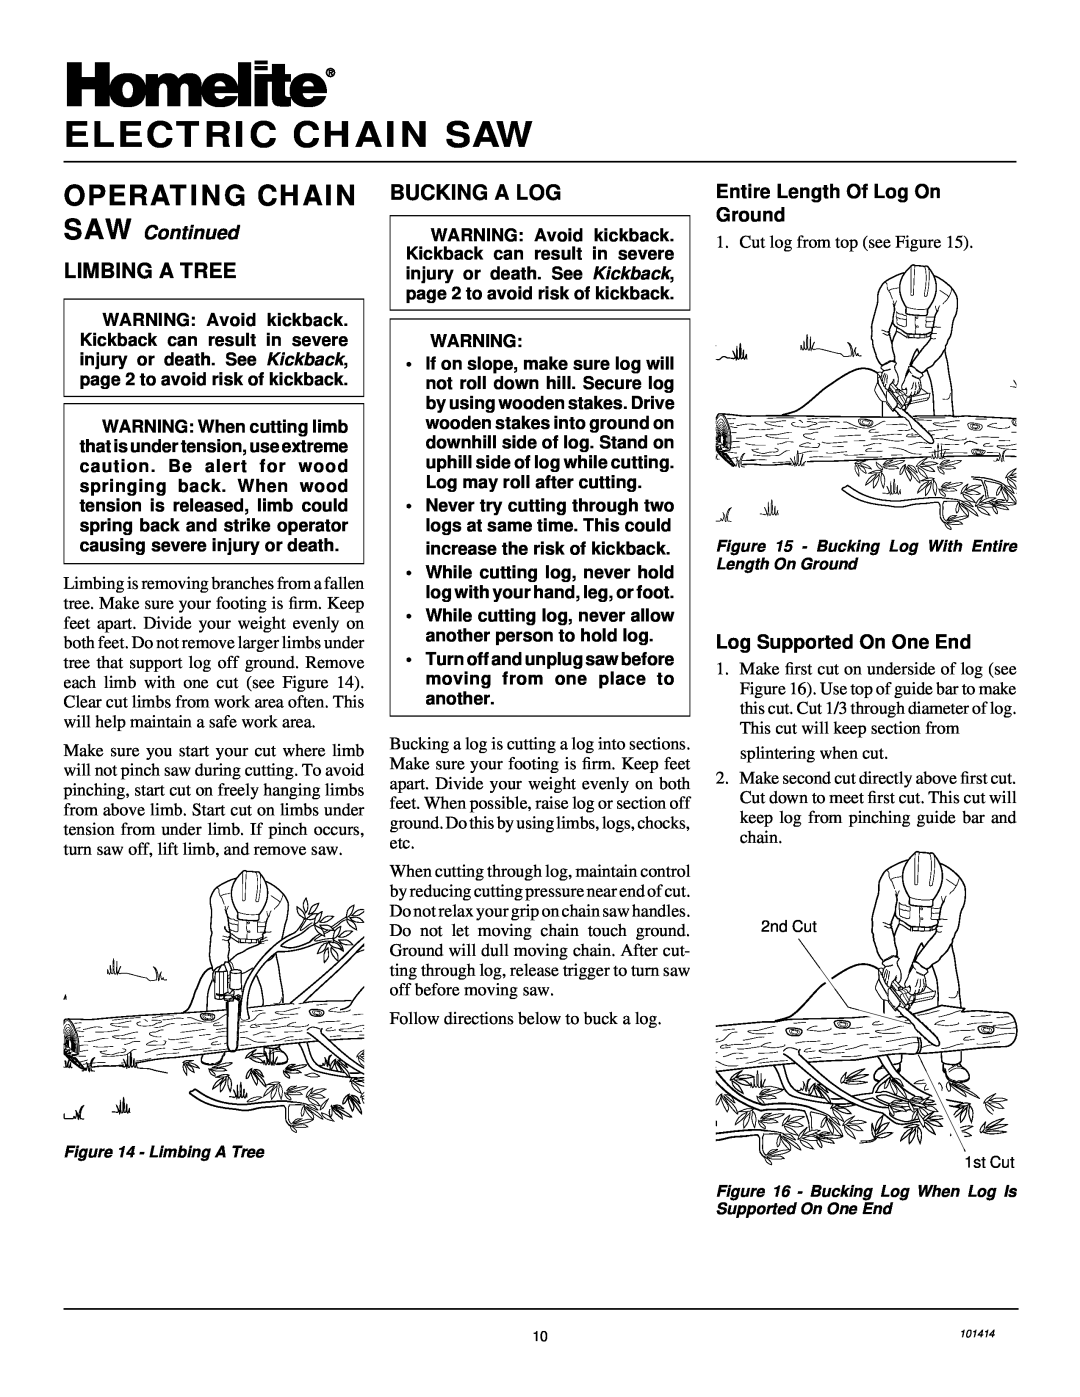 Homelite EL14 owner manual Operating Chain, Limbing A Tree, Bucking A Log, SAW Continued, Entire Length Of Log On Ground 